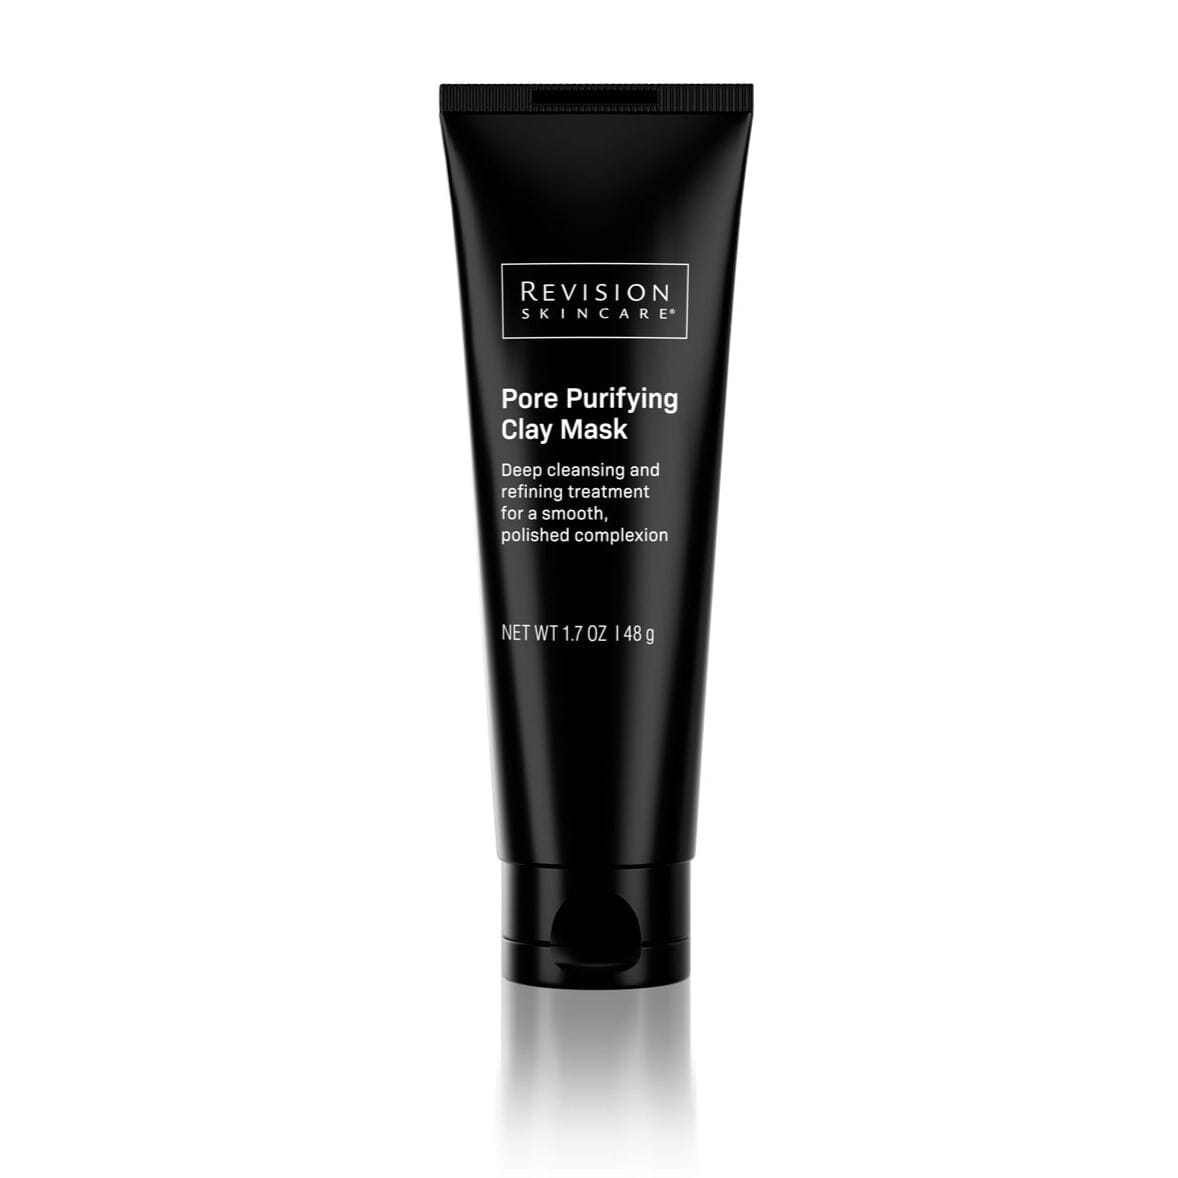 Revision Skincare Pore Purifying Clay Mask Revision 1.7 oz. Shop at Exclusive Beauty Club